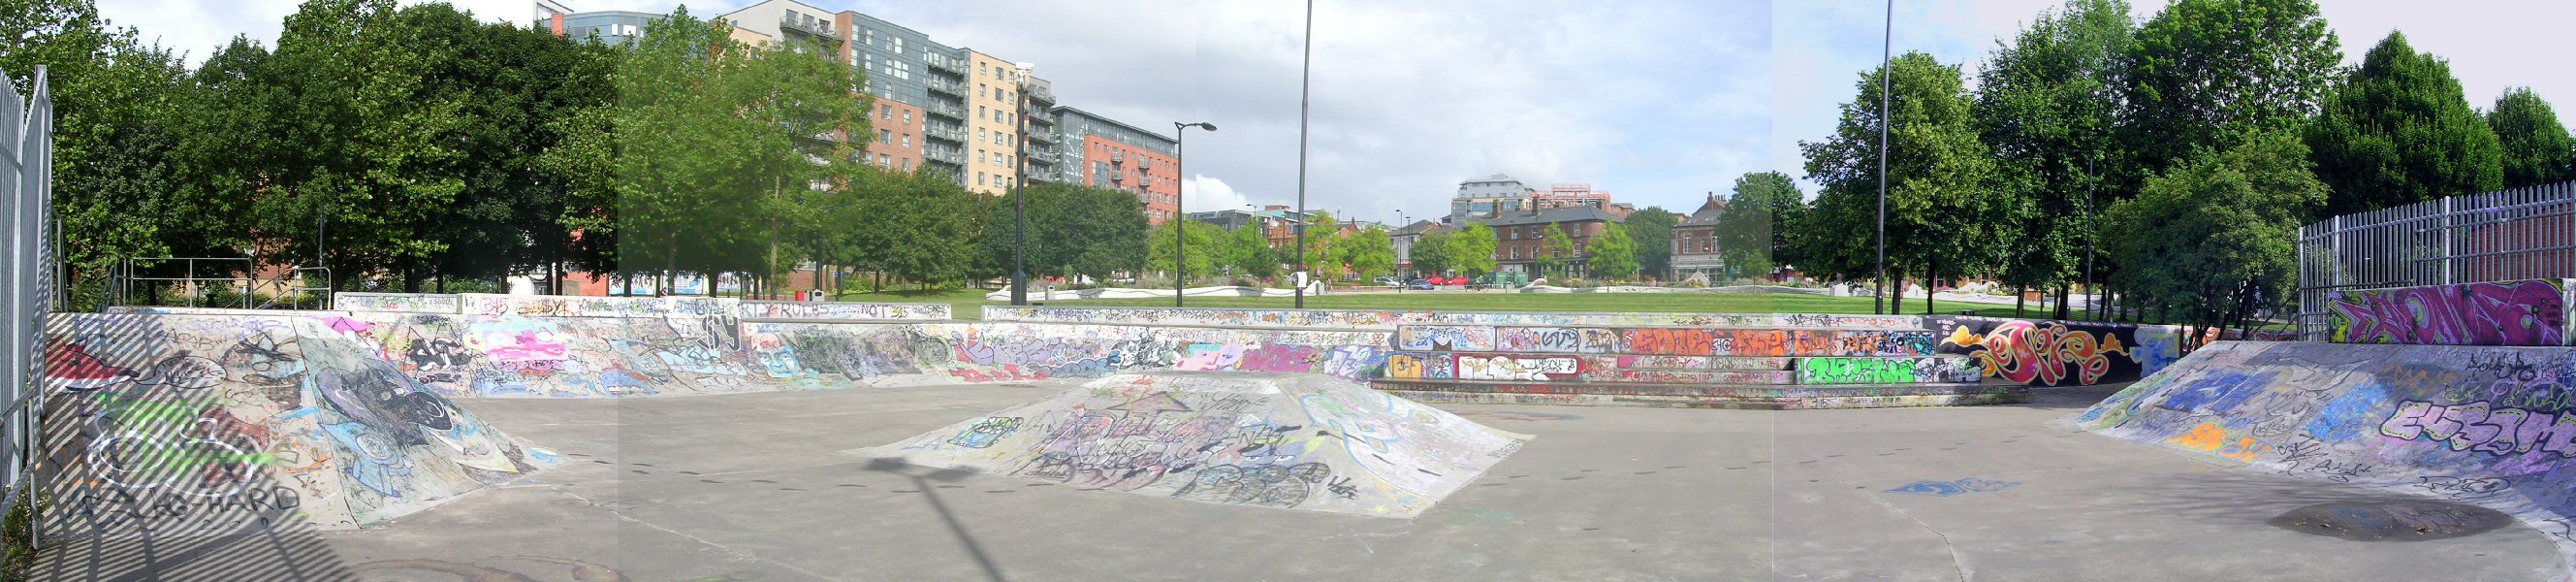 Panorama of Devonshire Green, July 2009